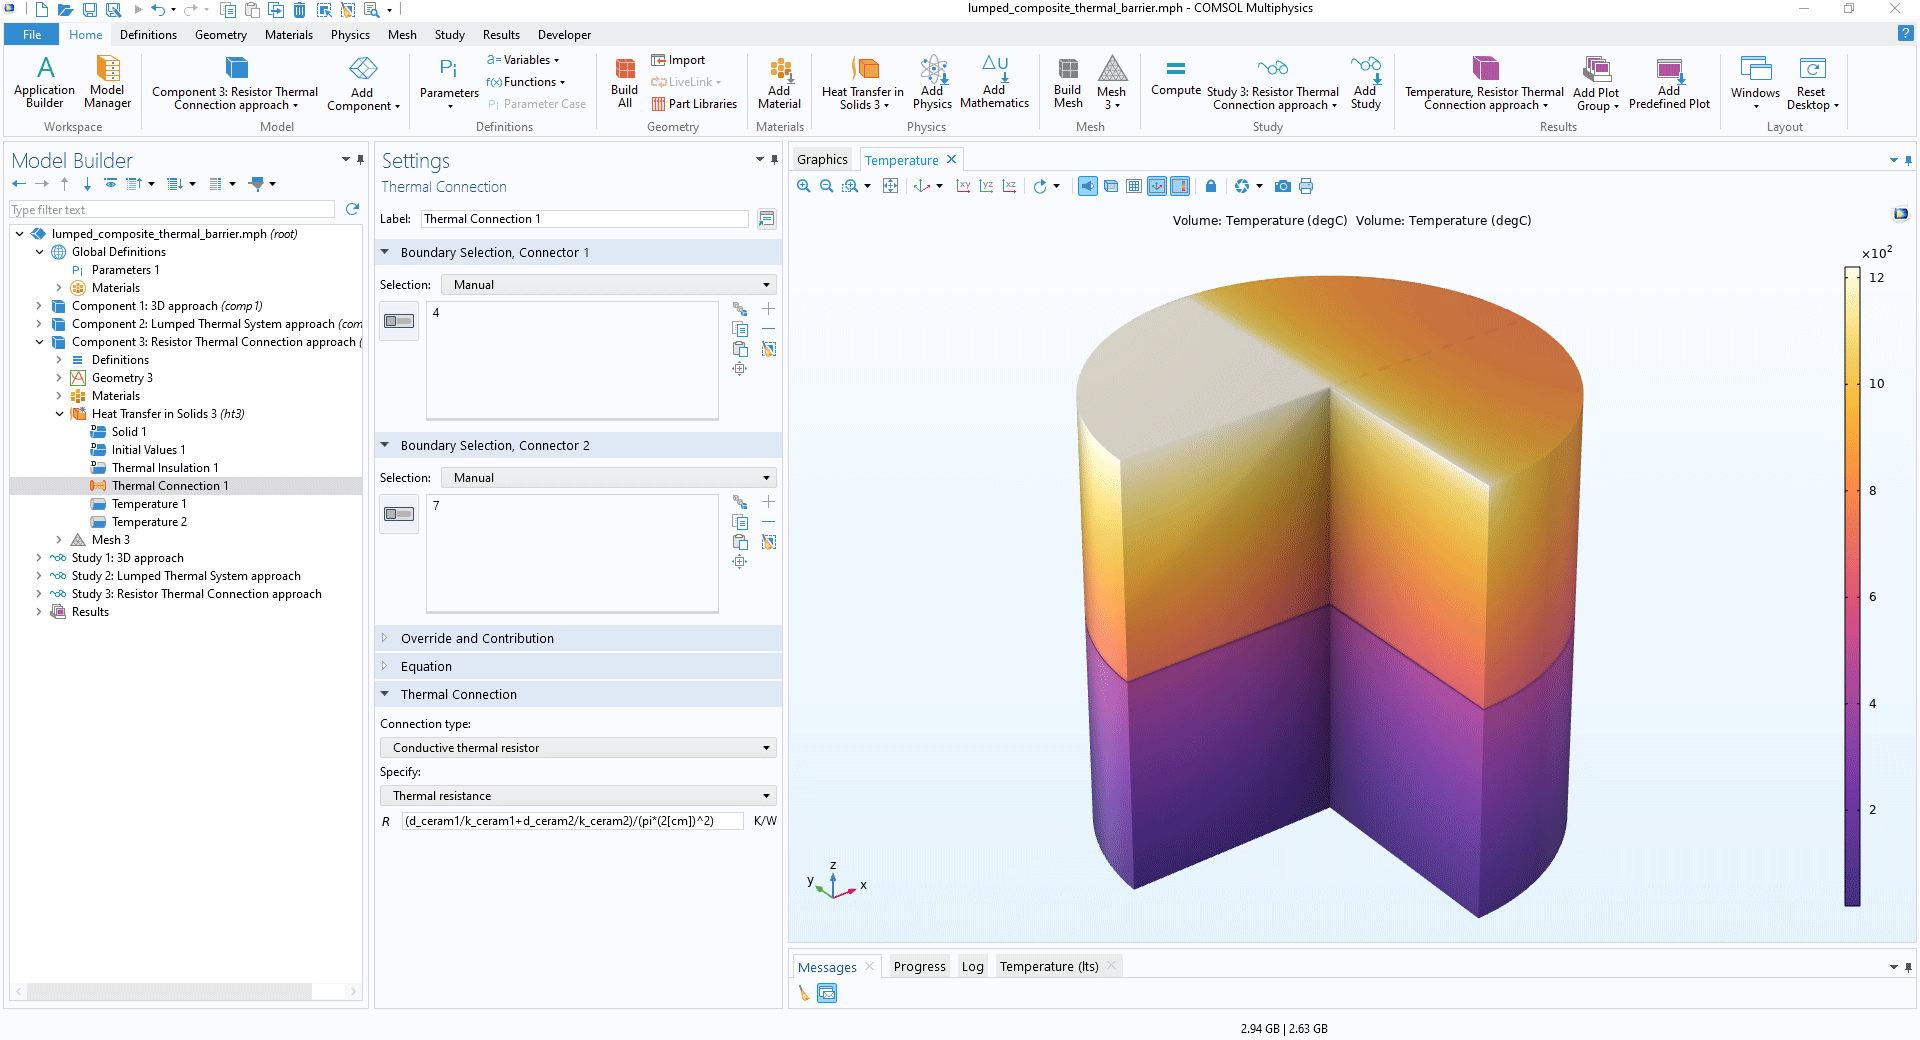 The COMSOL Multiphysics UI showing the Model Builder with the Thermal Connection node highlighted, the corresponding Settings window, and a lumped composite model in the Graphics window.